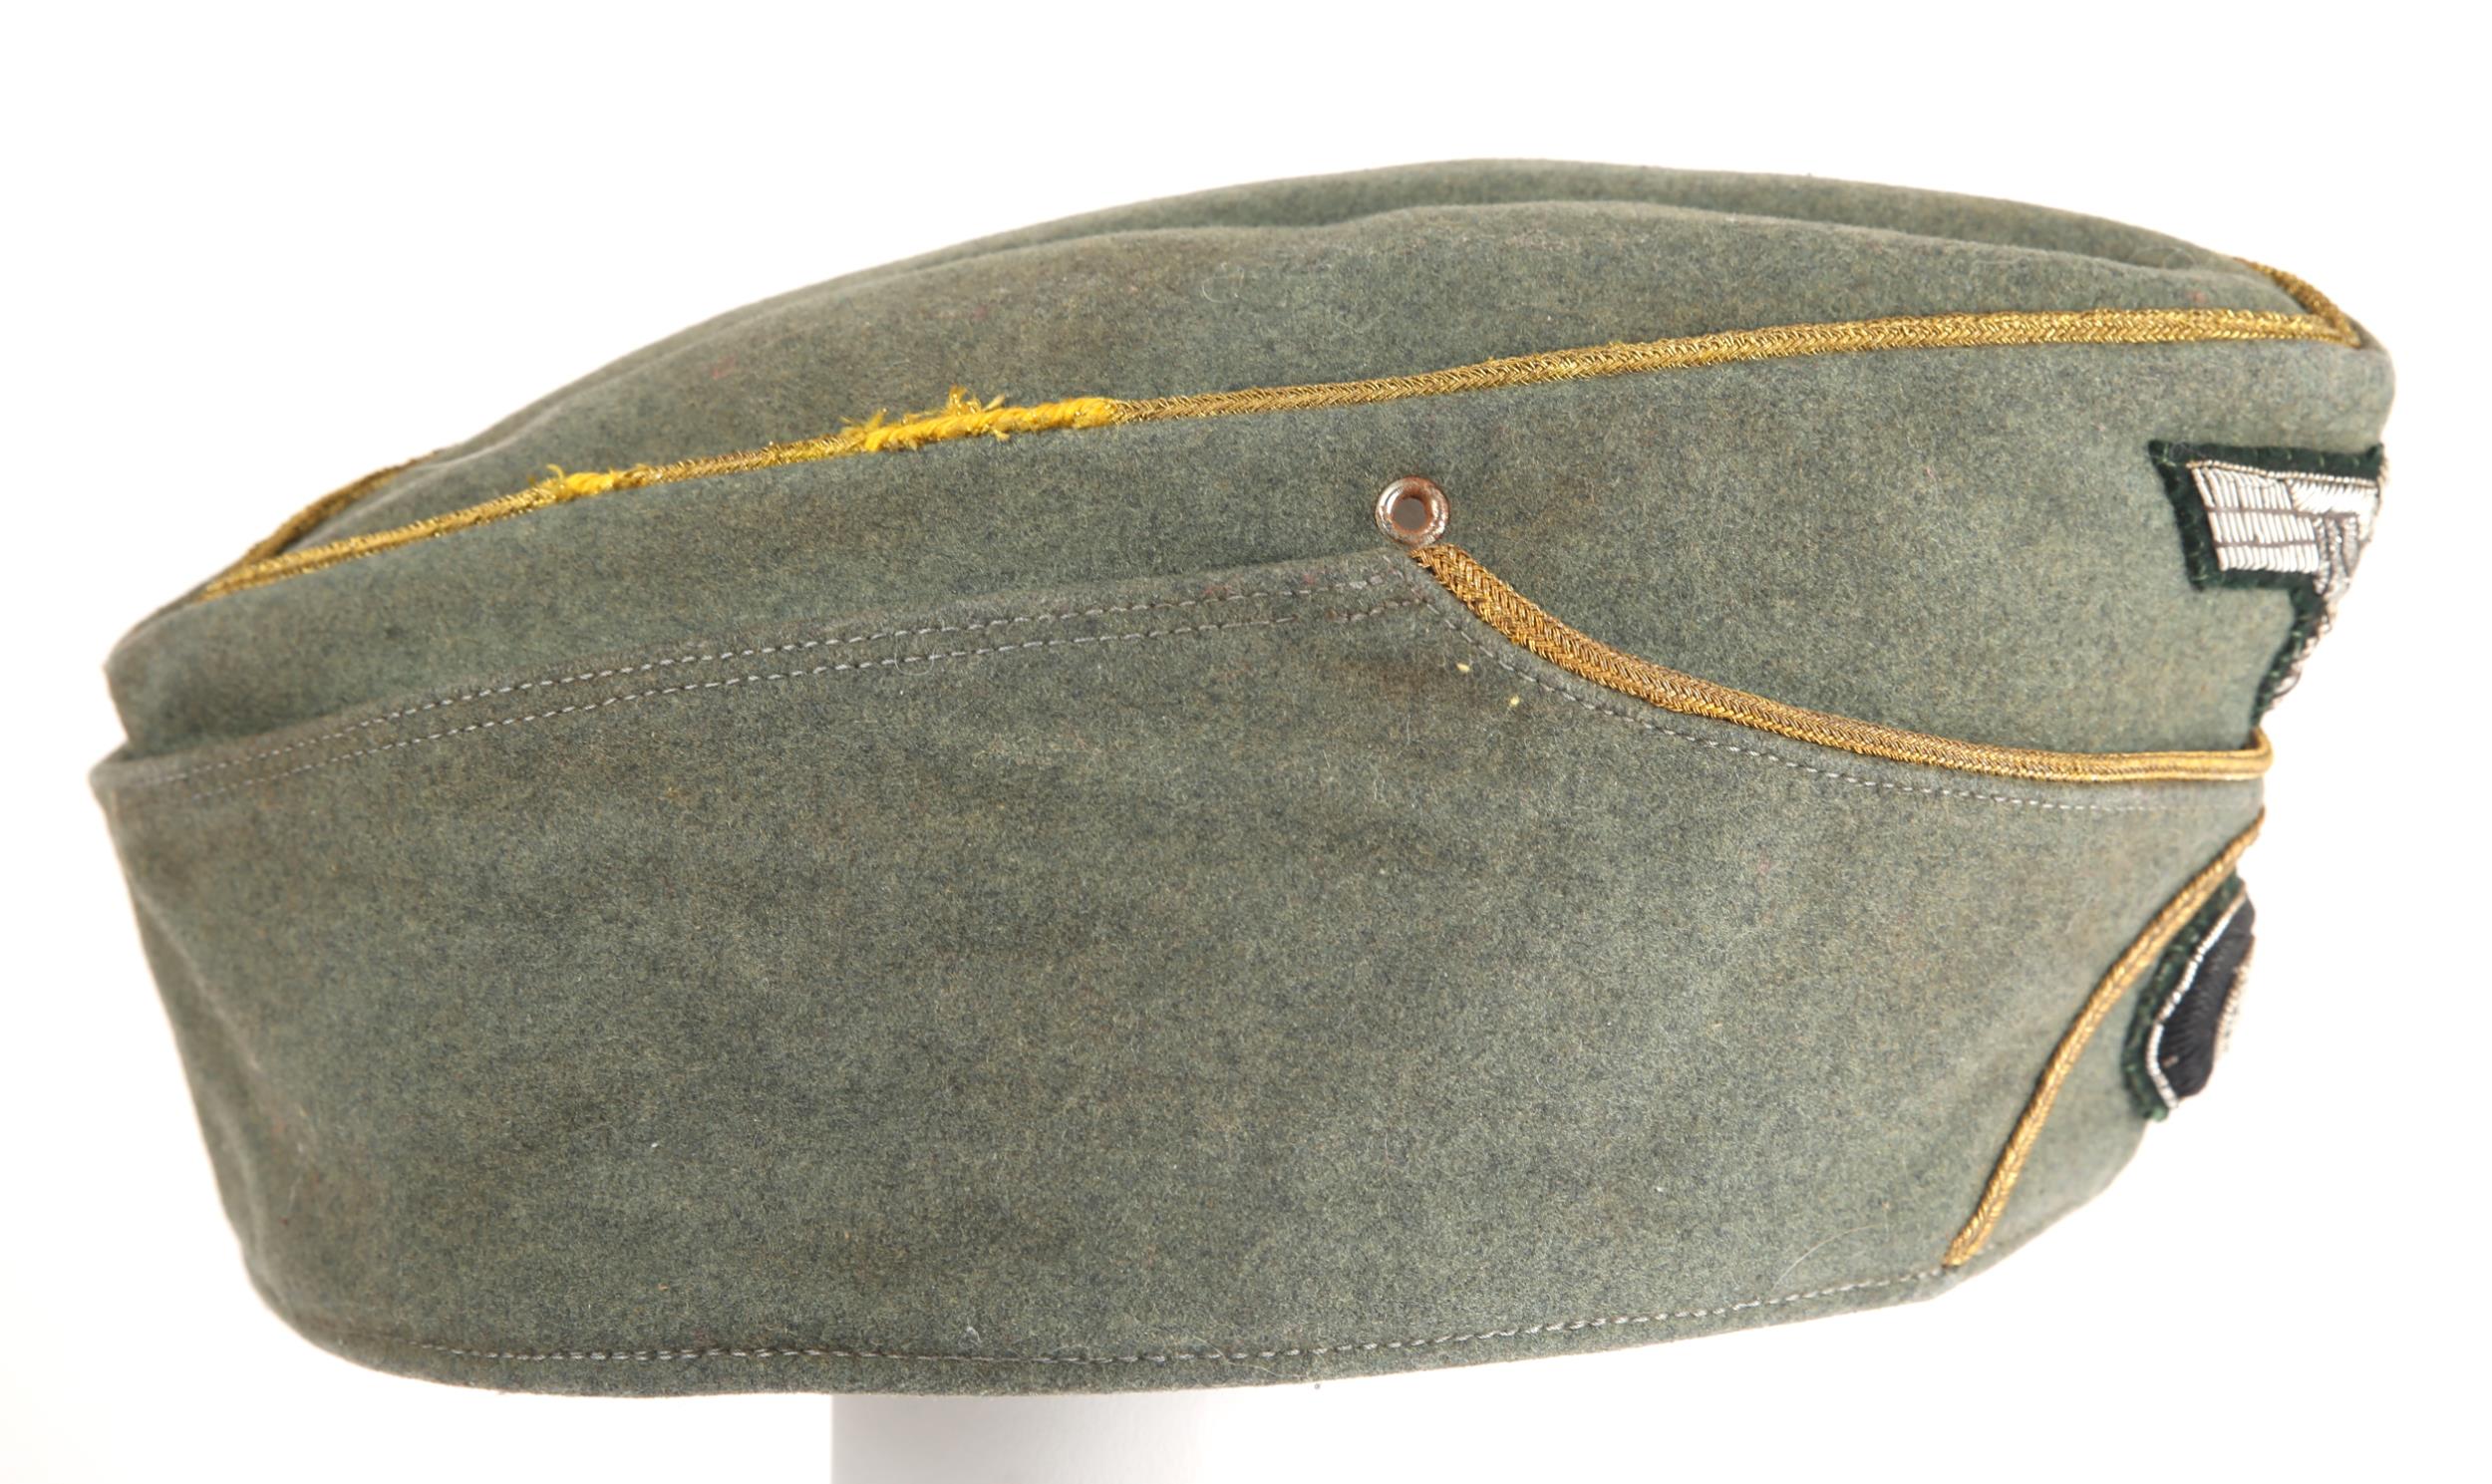 1933-42 German General's side cap. A privately purchased M38 field cap, piped in gilt bullion. - Image 4 of 4